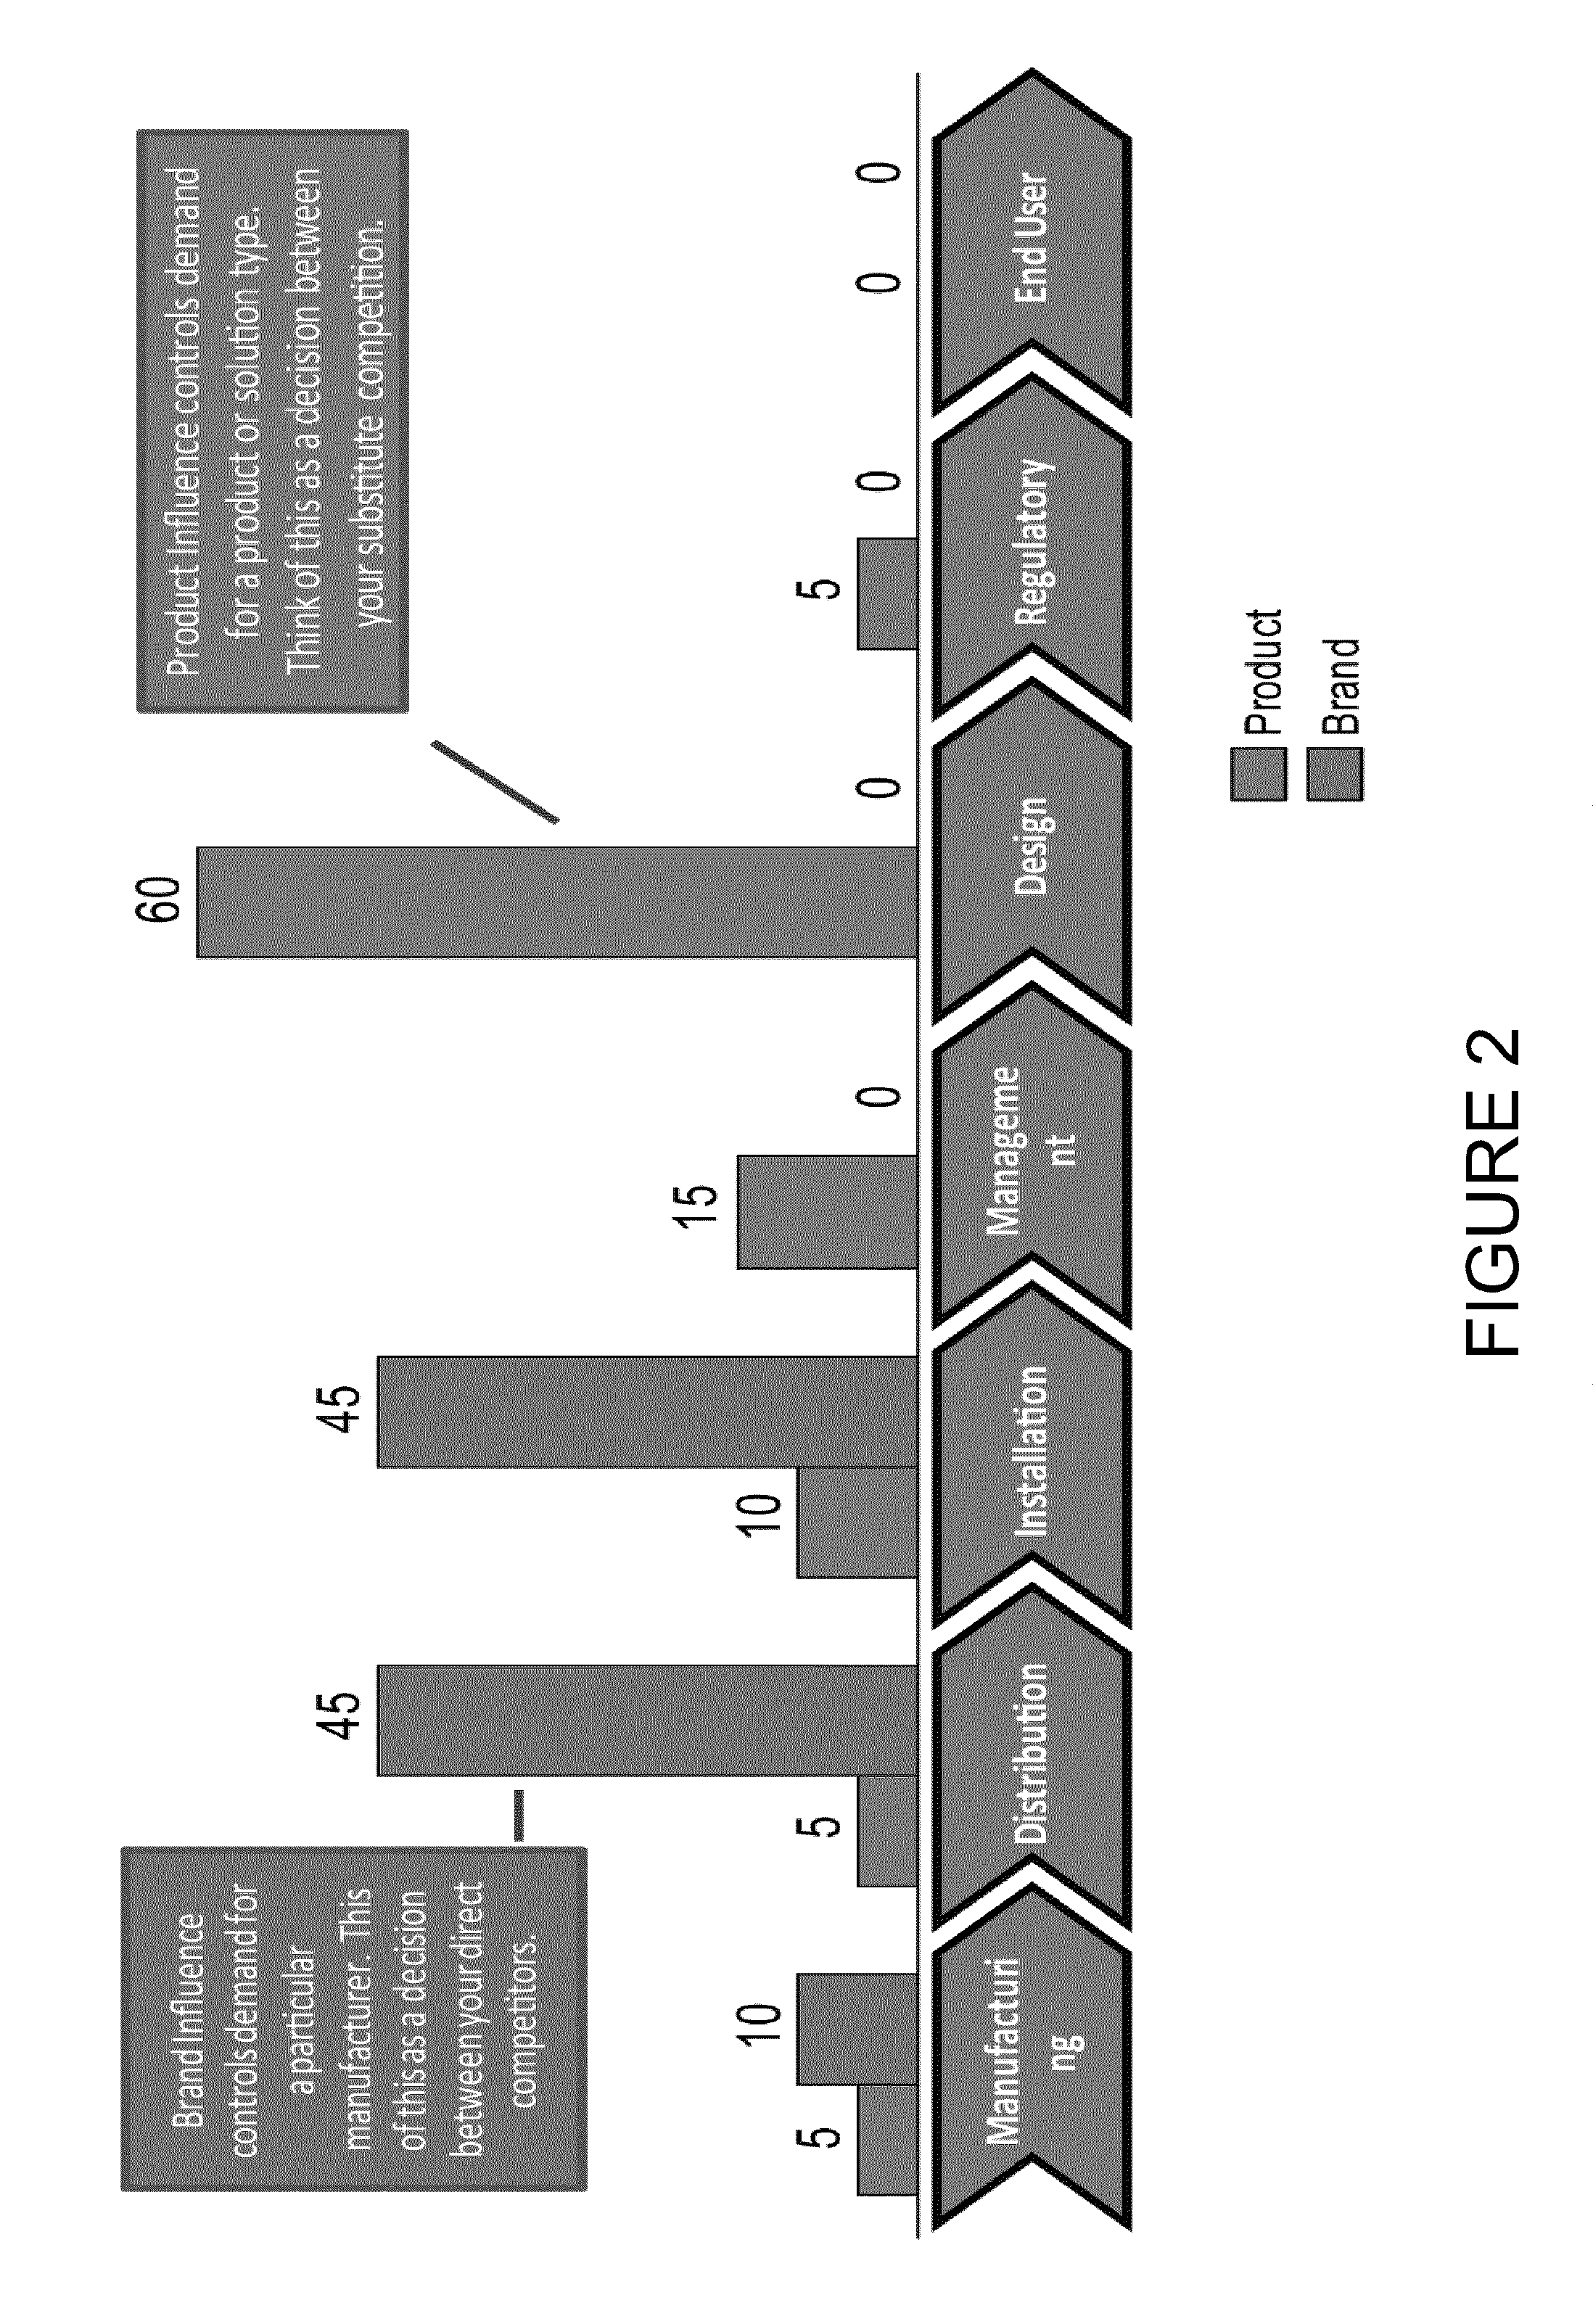 System and method for customer value creation